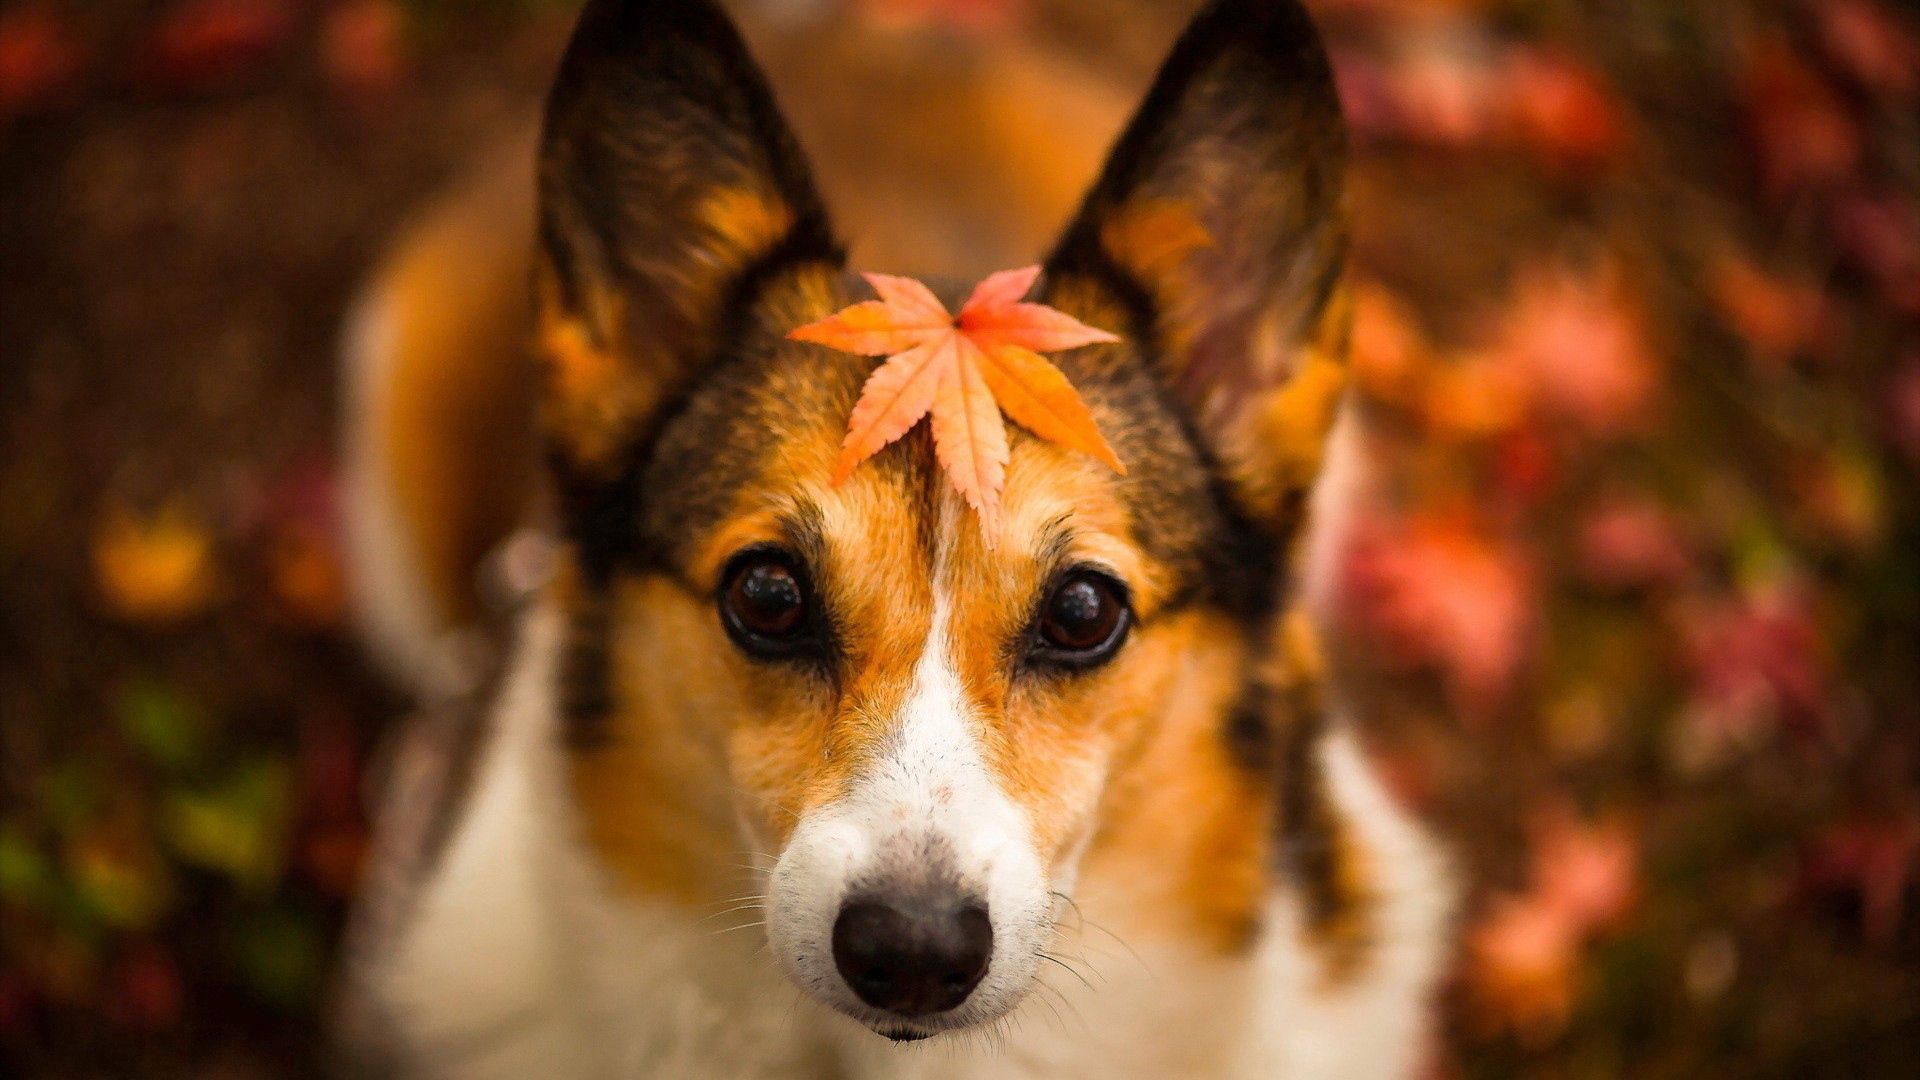 Download wallpaper 1920x1080 dog, face, leaves, autumn HD background